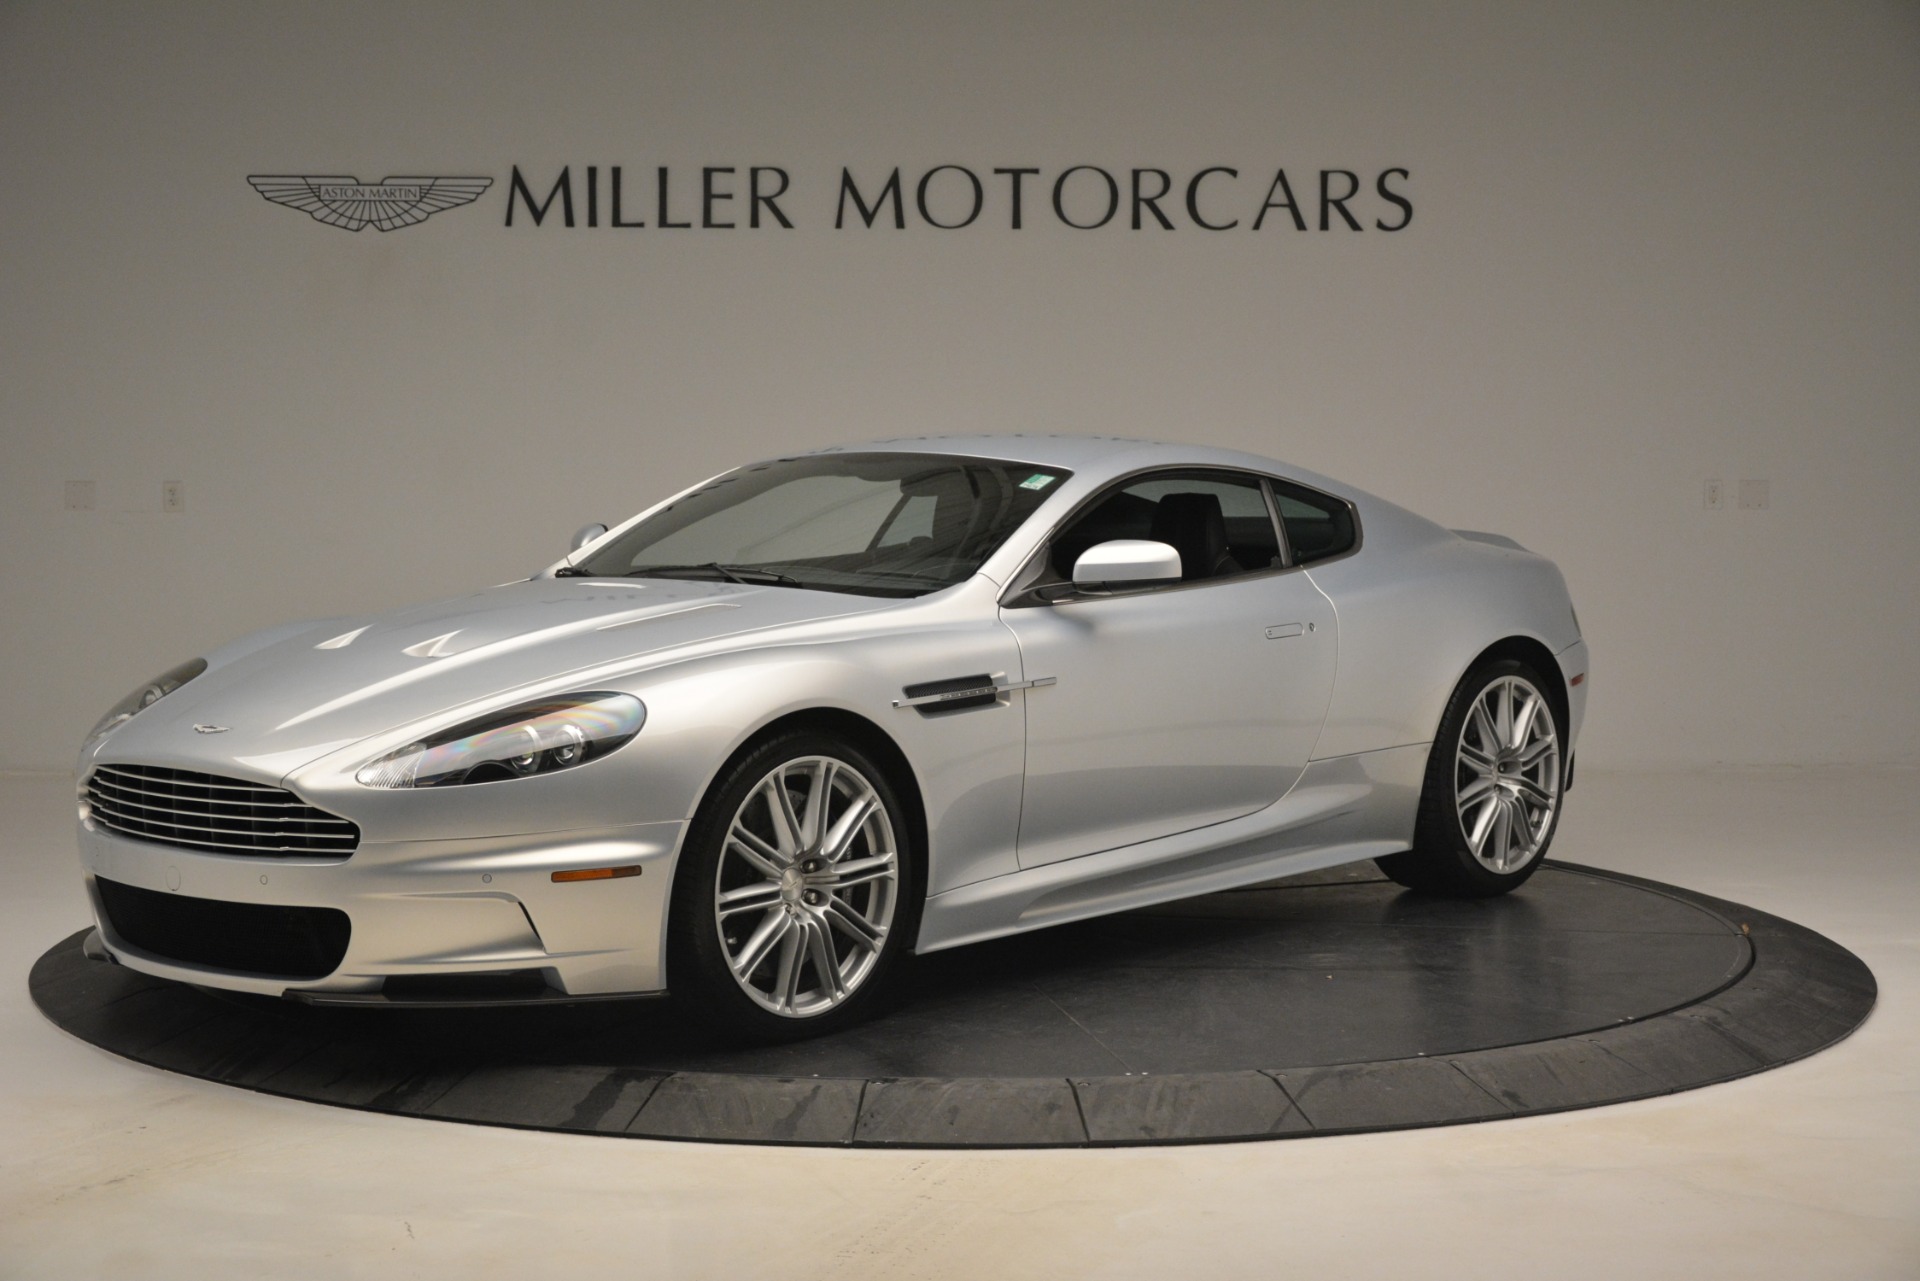 Used 2009 Aston Martin DBS Coupe for sale Sold at Aston Martin of Greenwich in Greenwich CT 06830 1